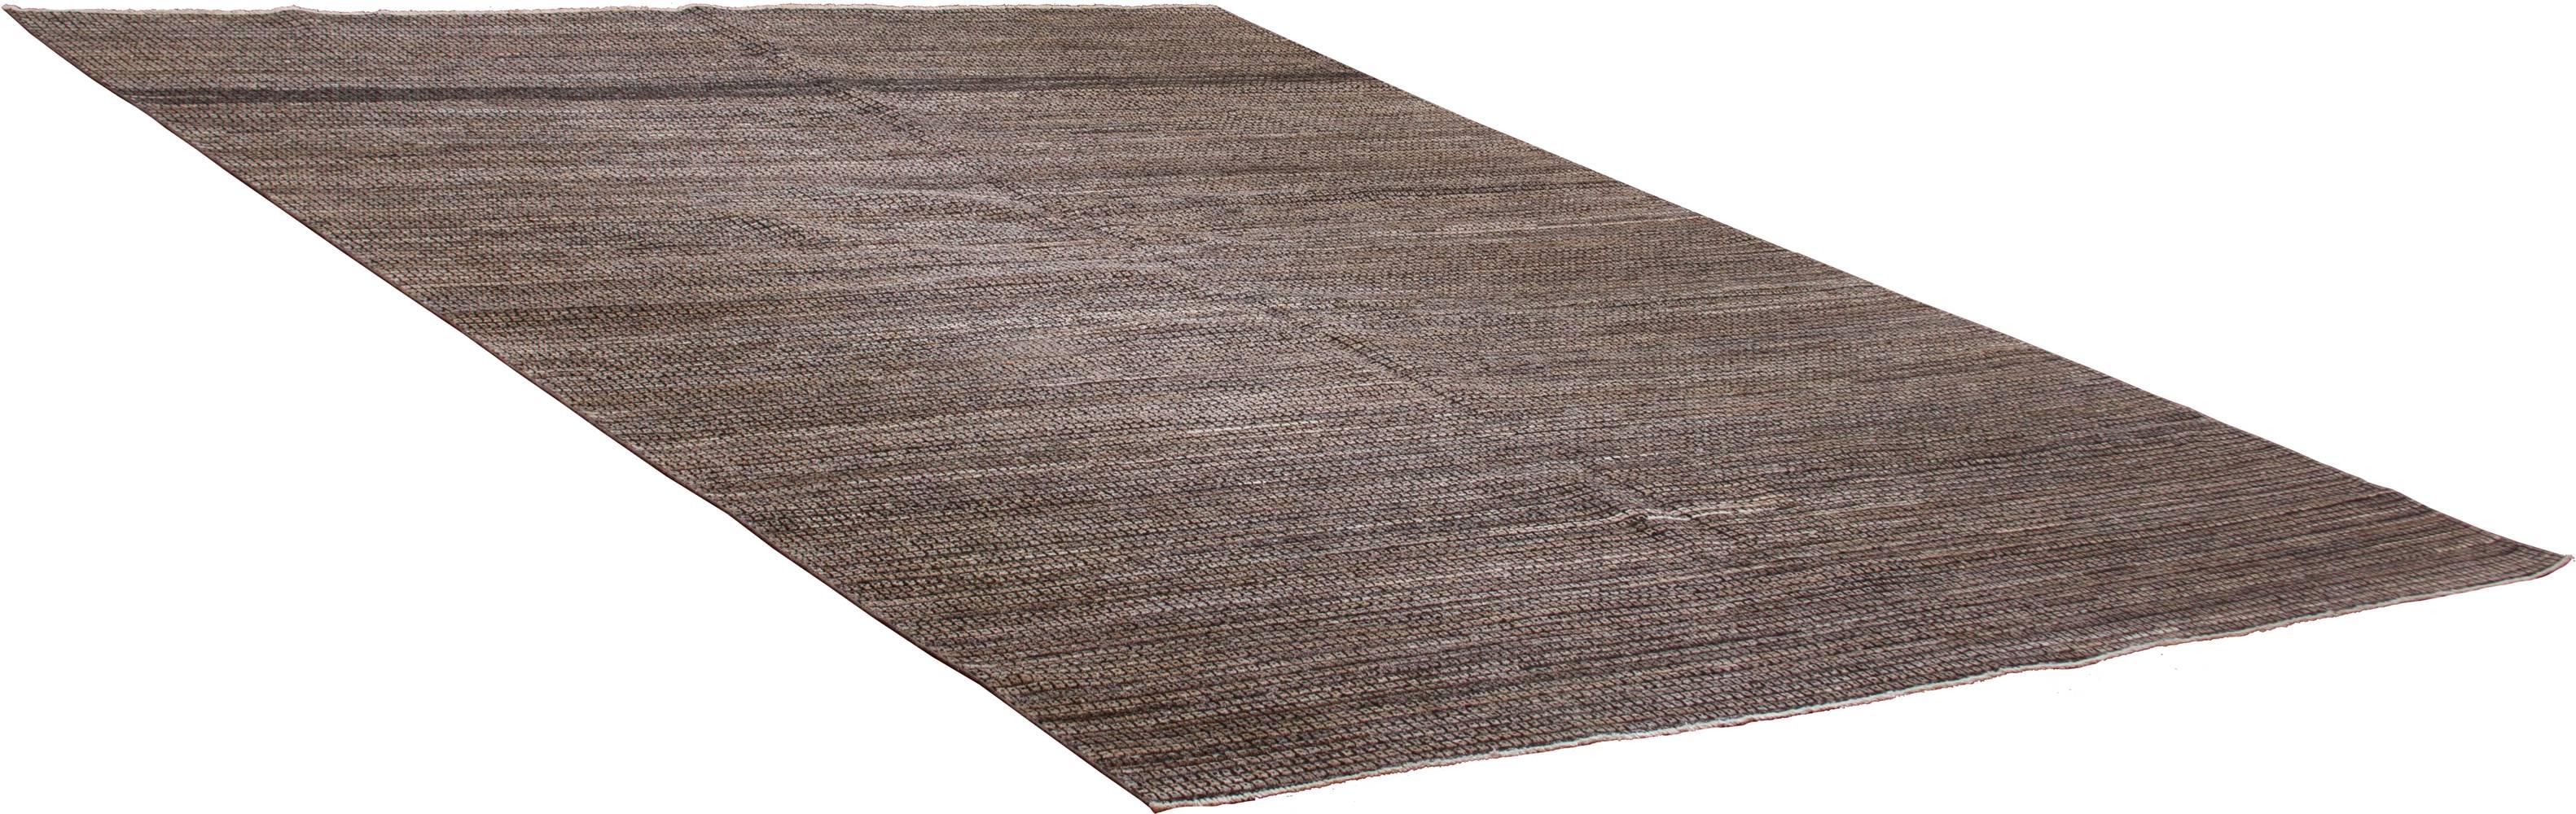 Wool Natural Undyed High Low Pile Rug For Sale